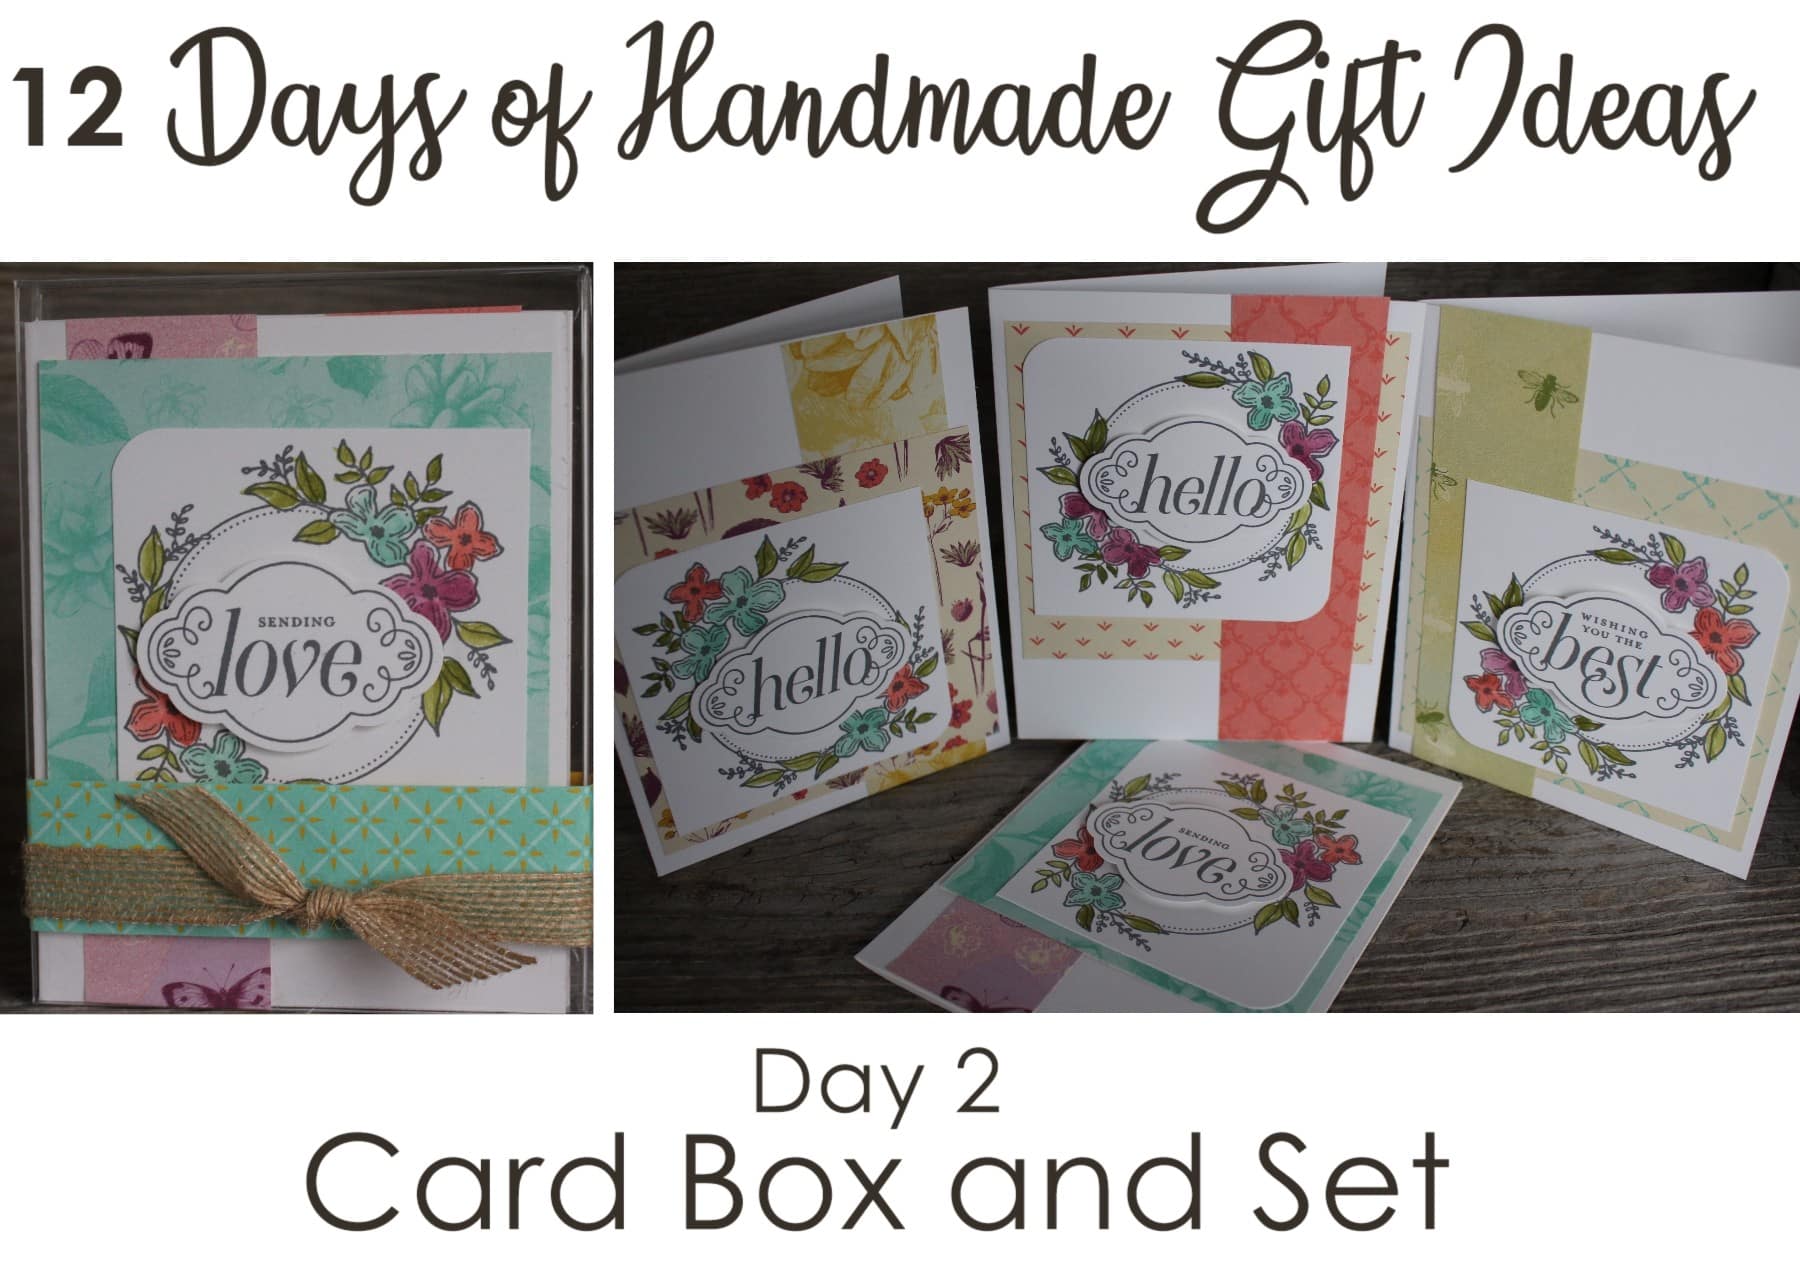 12 Days of Handmade Gift Ideas – Day 2 Card Box and Set